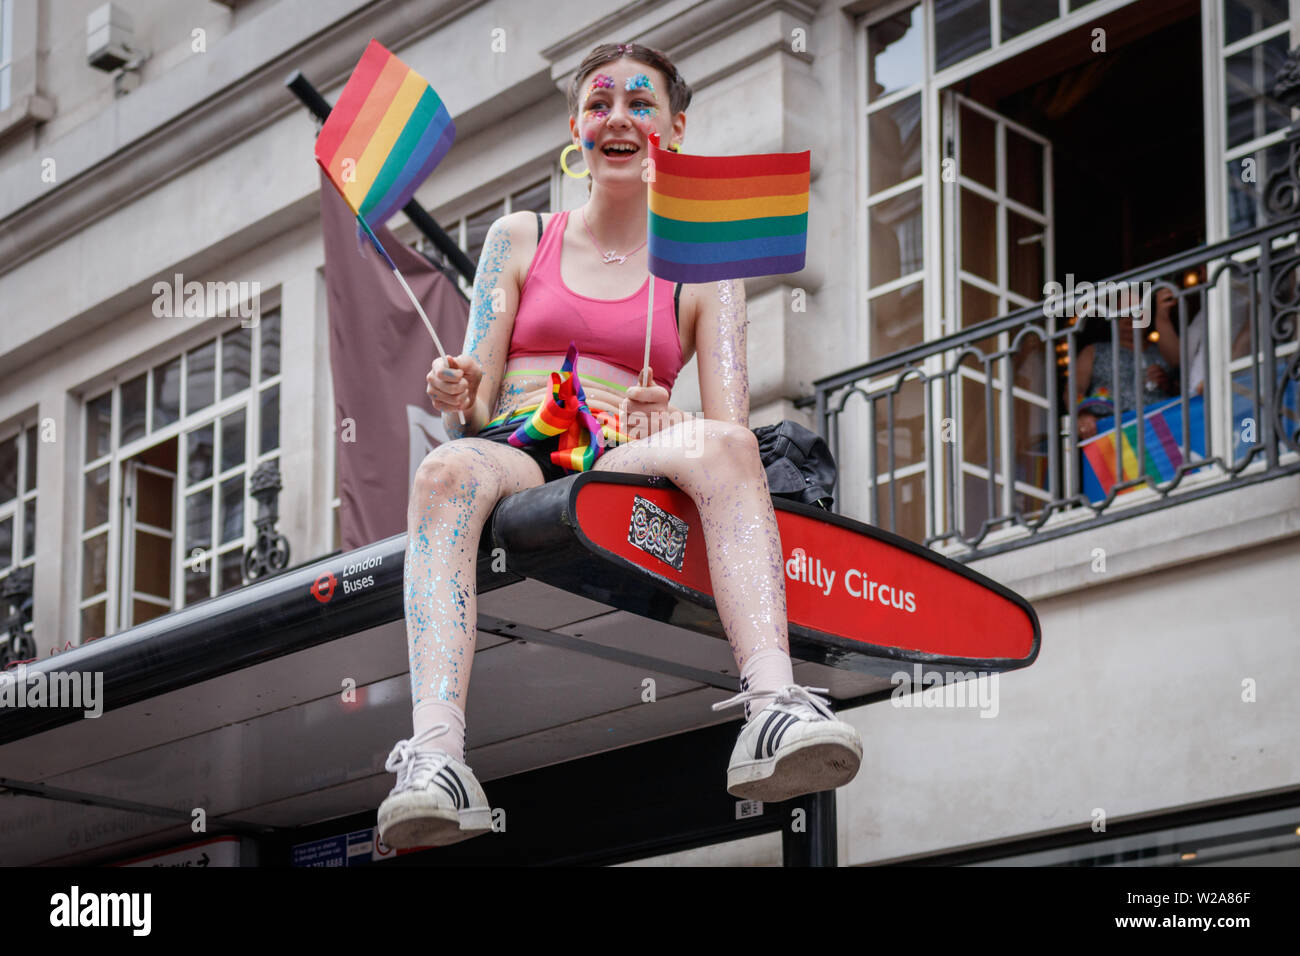 A girl watches from a bus stop, while waving rainbow flags during the parade.The Pride in London 2019 Parade Day is a London-based event held by Pride in London. It is a parade of people of all genders, sexualities, races, nationalities, backgrounds and faiths coming together for the UK’s biggest Pride celebration. Central London was covered in rainbow-themed decorations, signifying inclusiveness. Stock Photo